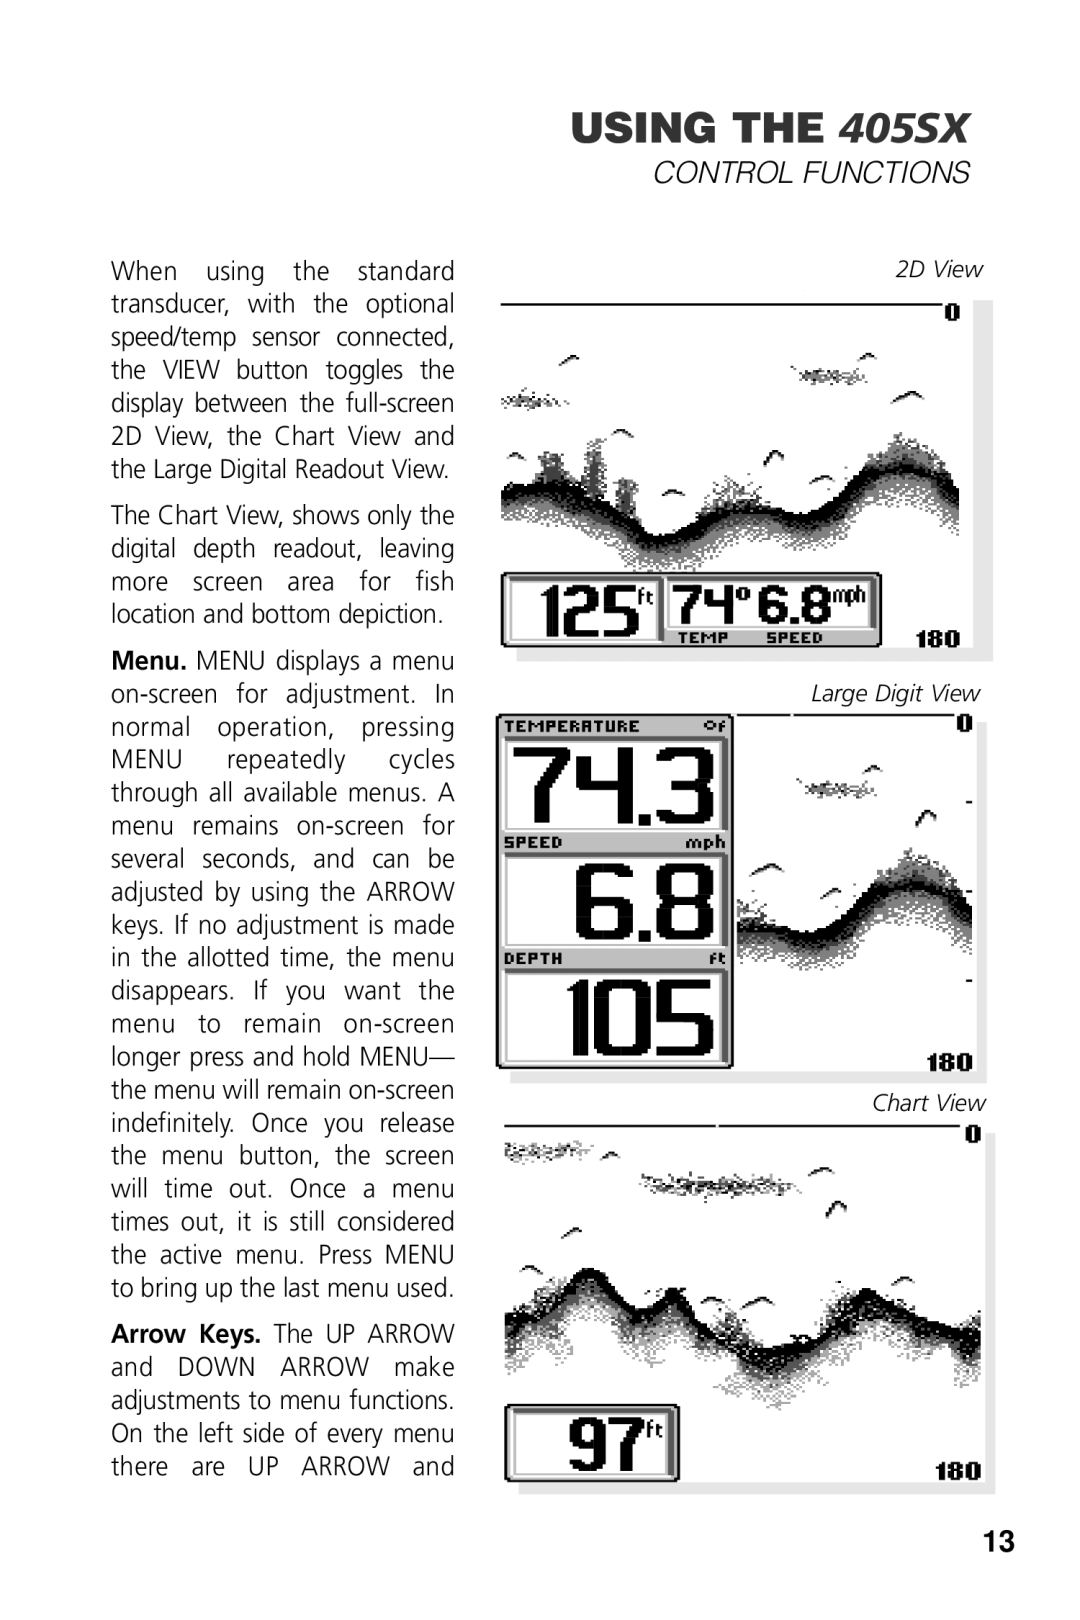 Humminbird manual USING THE 405SX, Control Functions, 2D View Large Digit View Chart View 